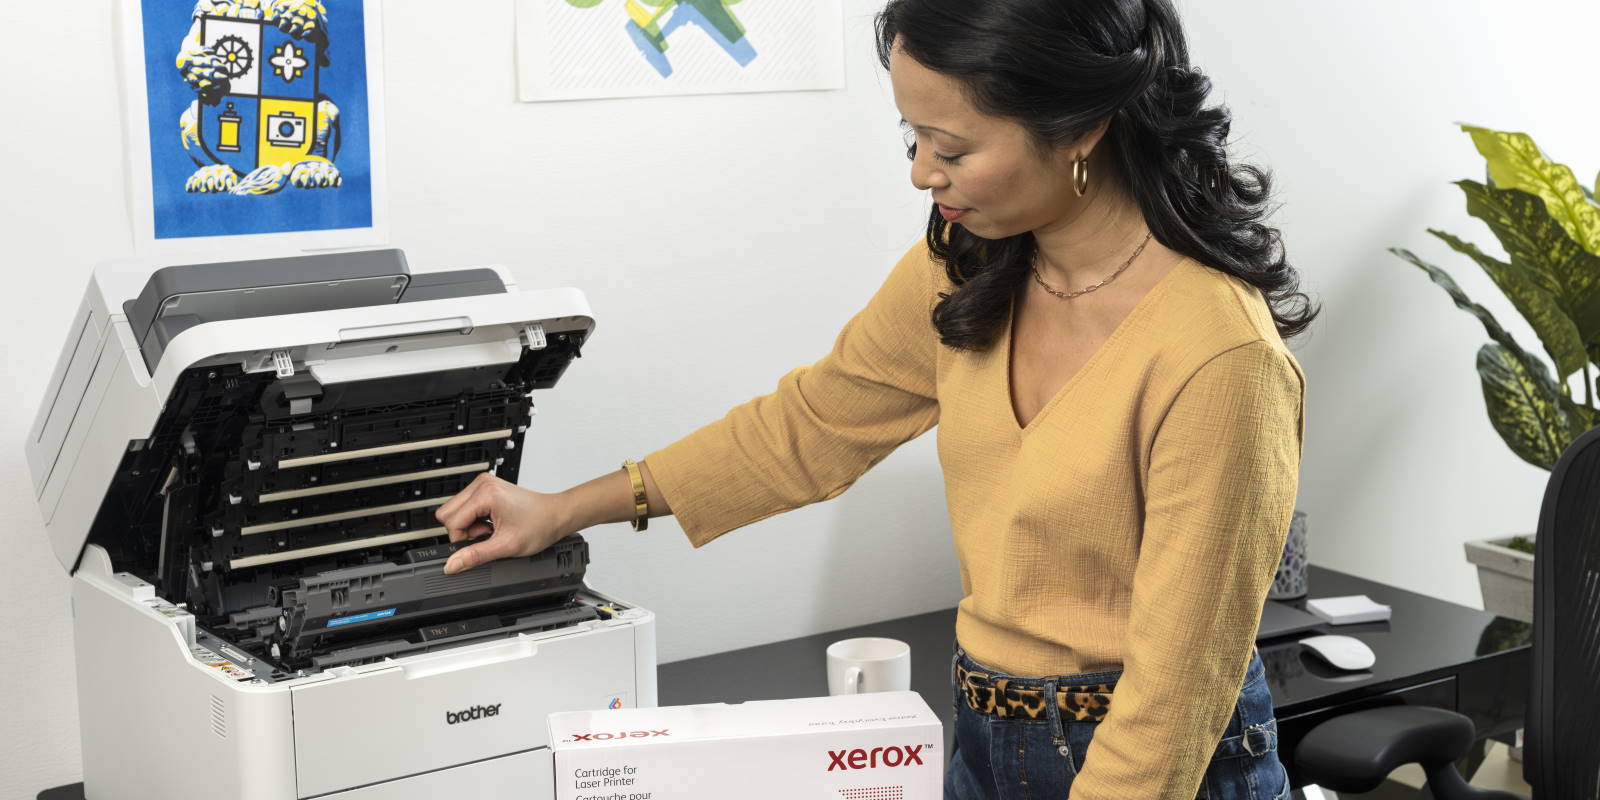 Replacement Cartridges for Brother DCP-1510 from Xerox